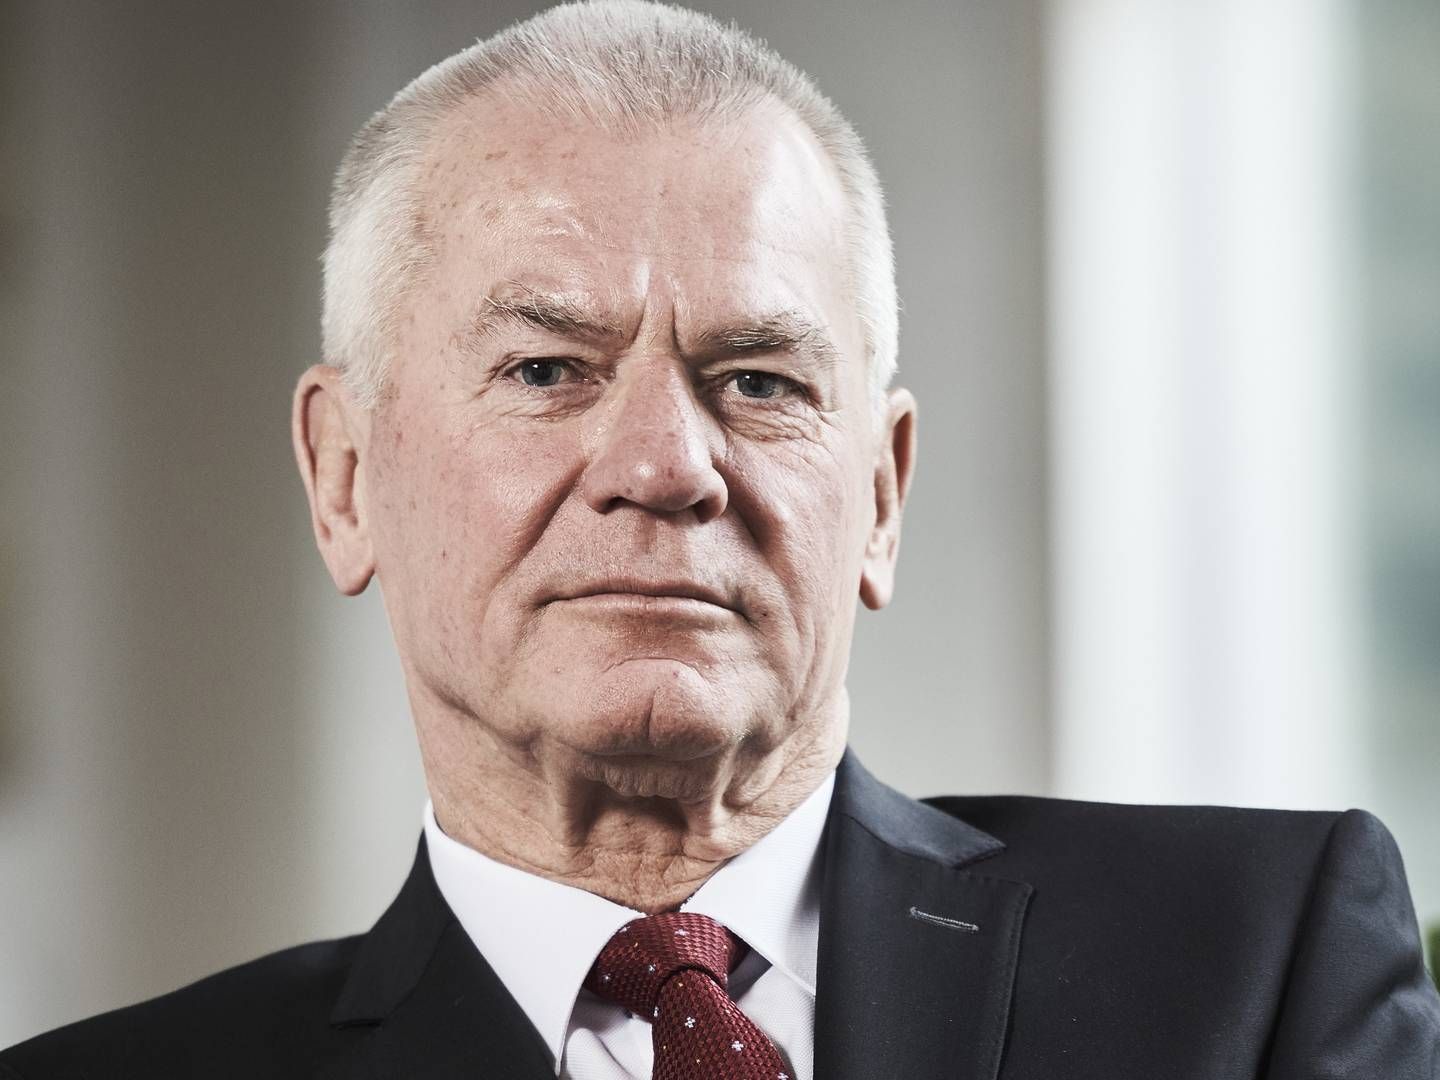 Thor Stadil is chairman of the Thornico group, which he manages together with his son, Christian Stadil. | Photo: PR / Skovdal / Thornico